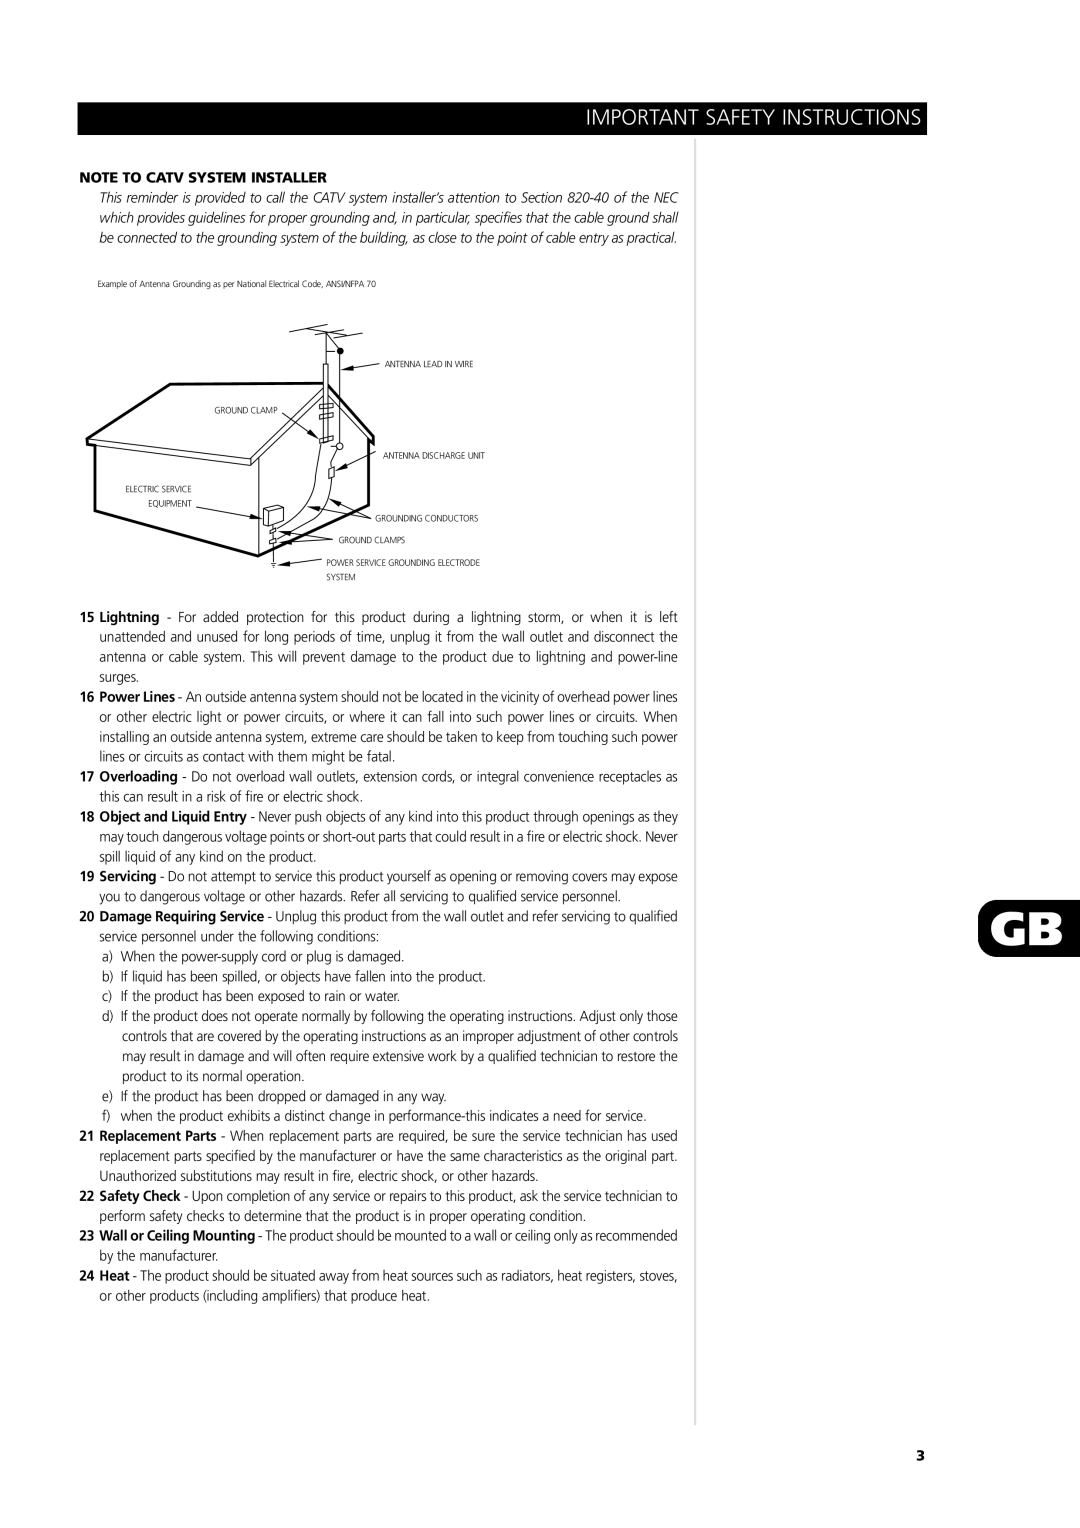 NAD L75 owner manual Note To Catv System Installer, Important Safety Instructions 